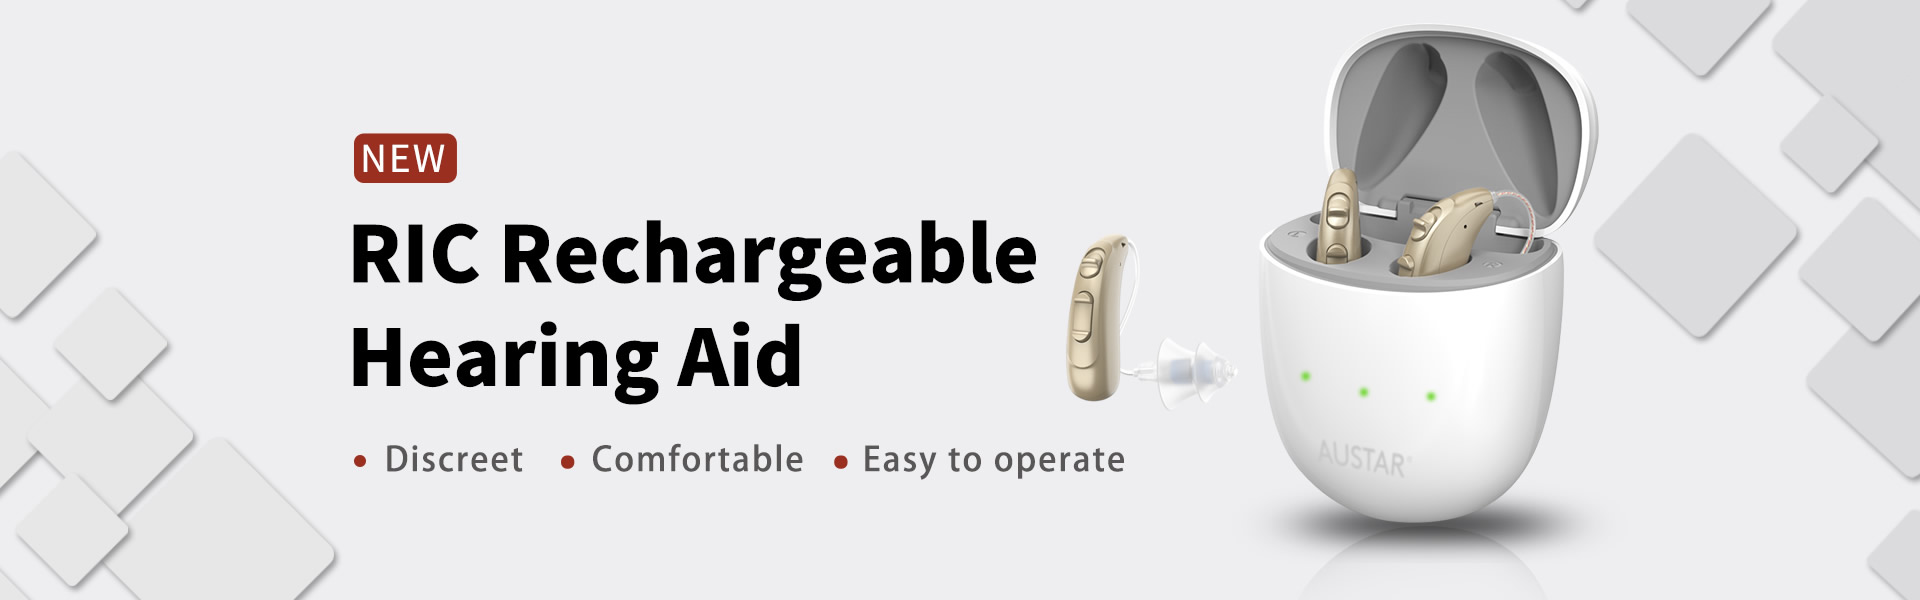 Rechargeable RIC Hearing Aids